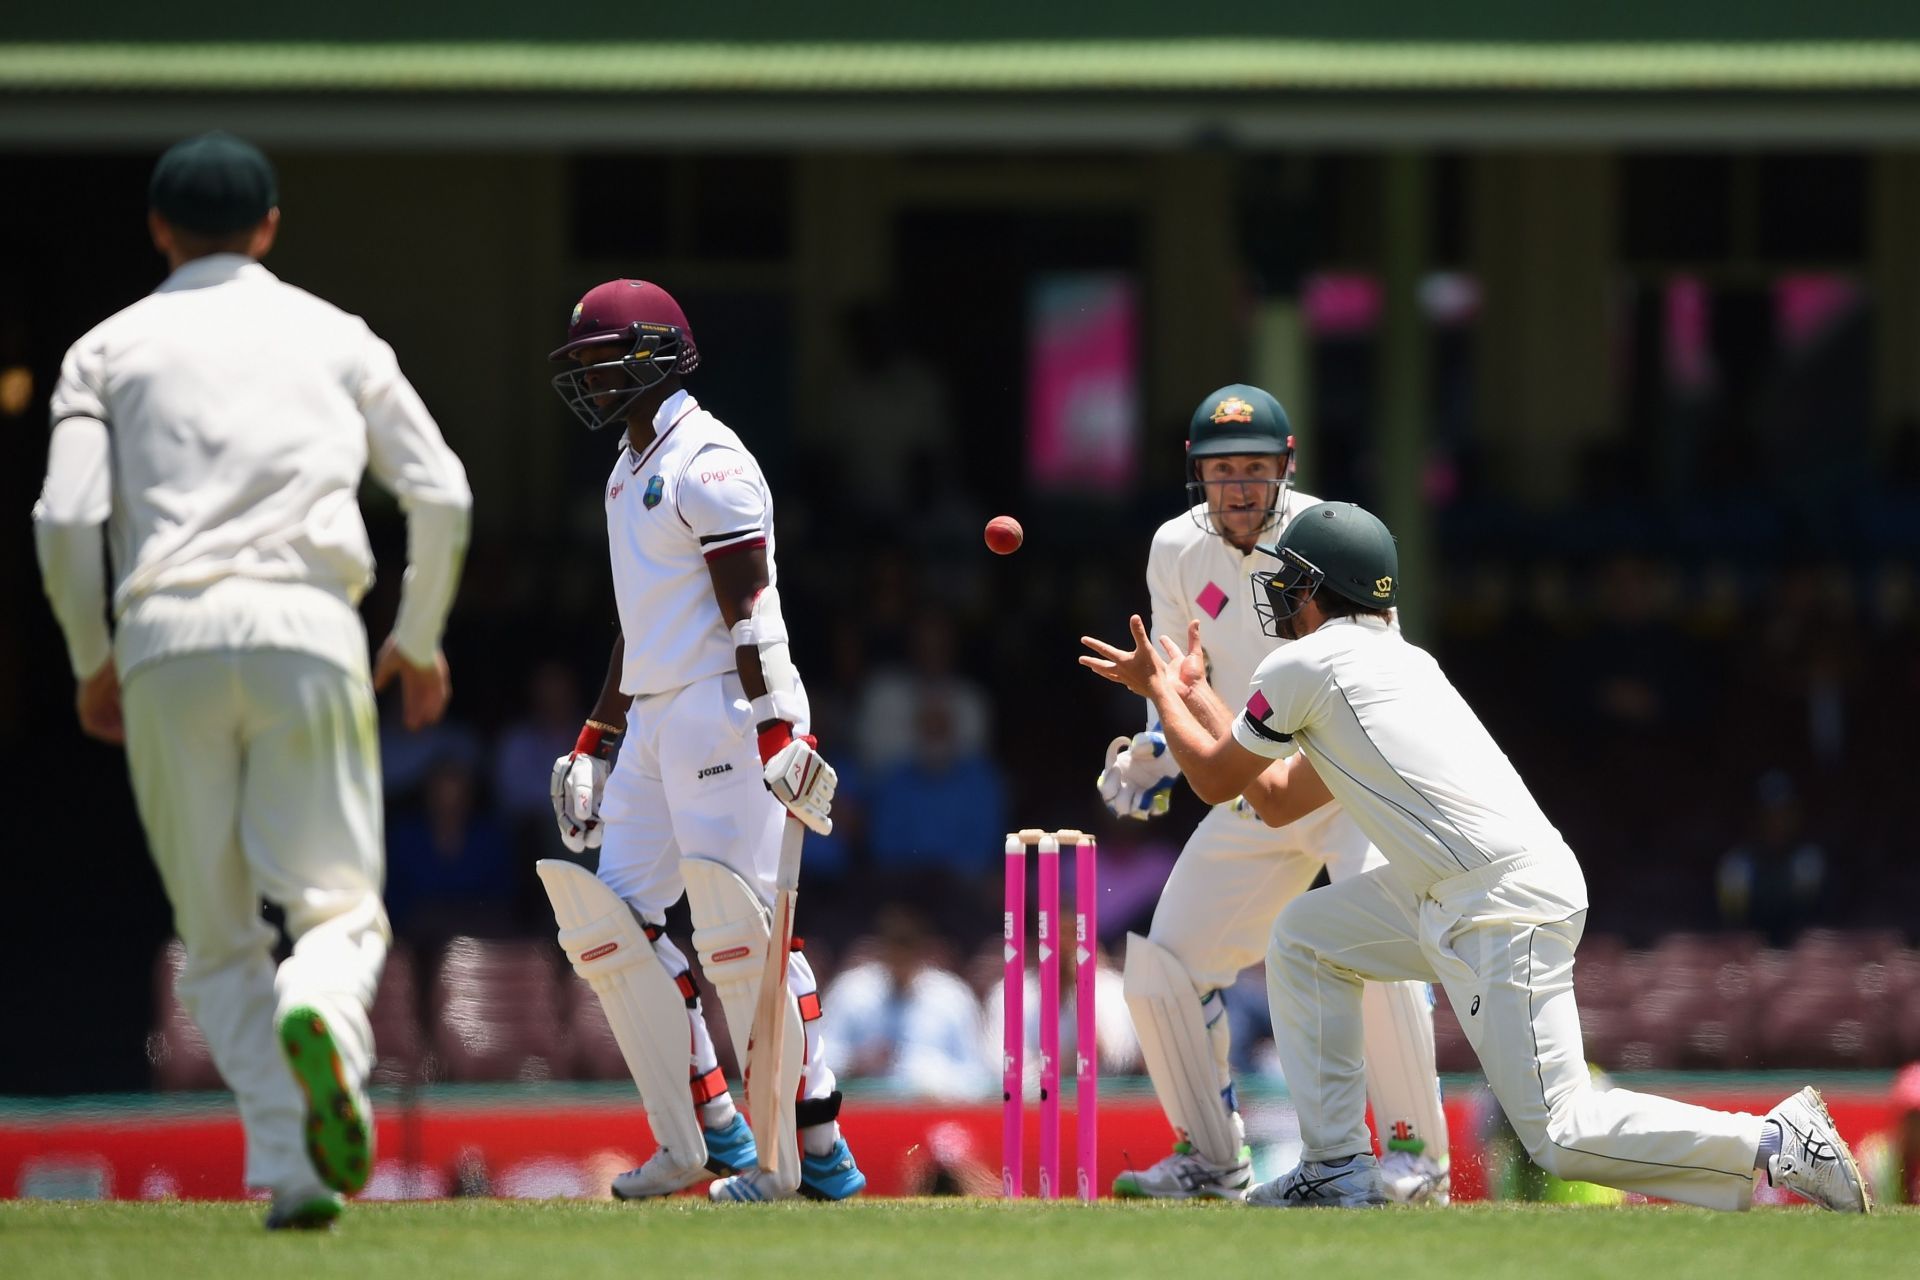 Australia will host West Indies in the next World Test Championship series (Image: Getty)